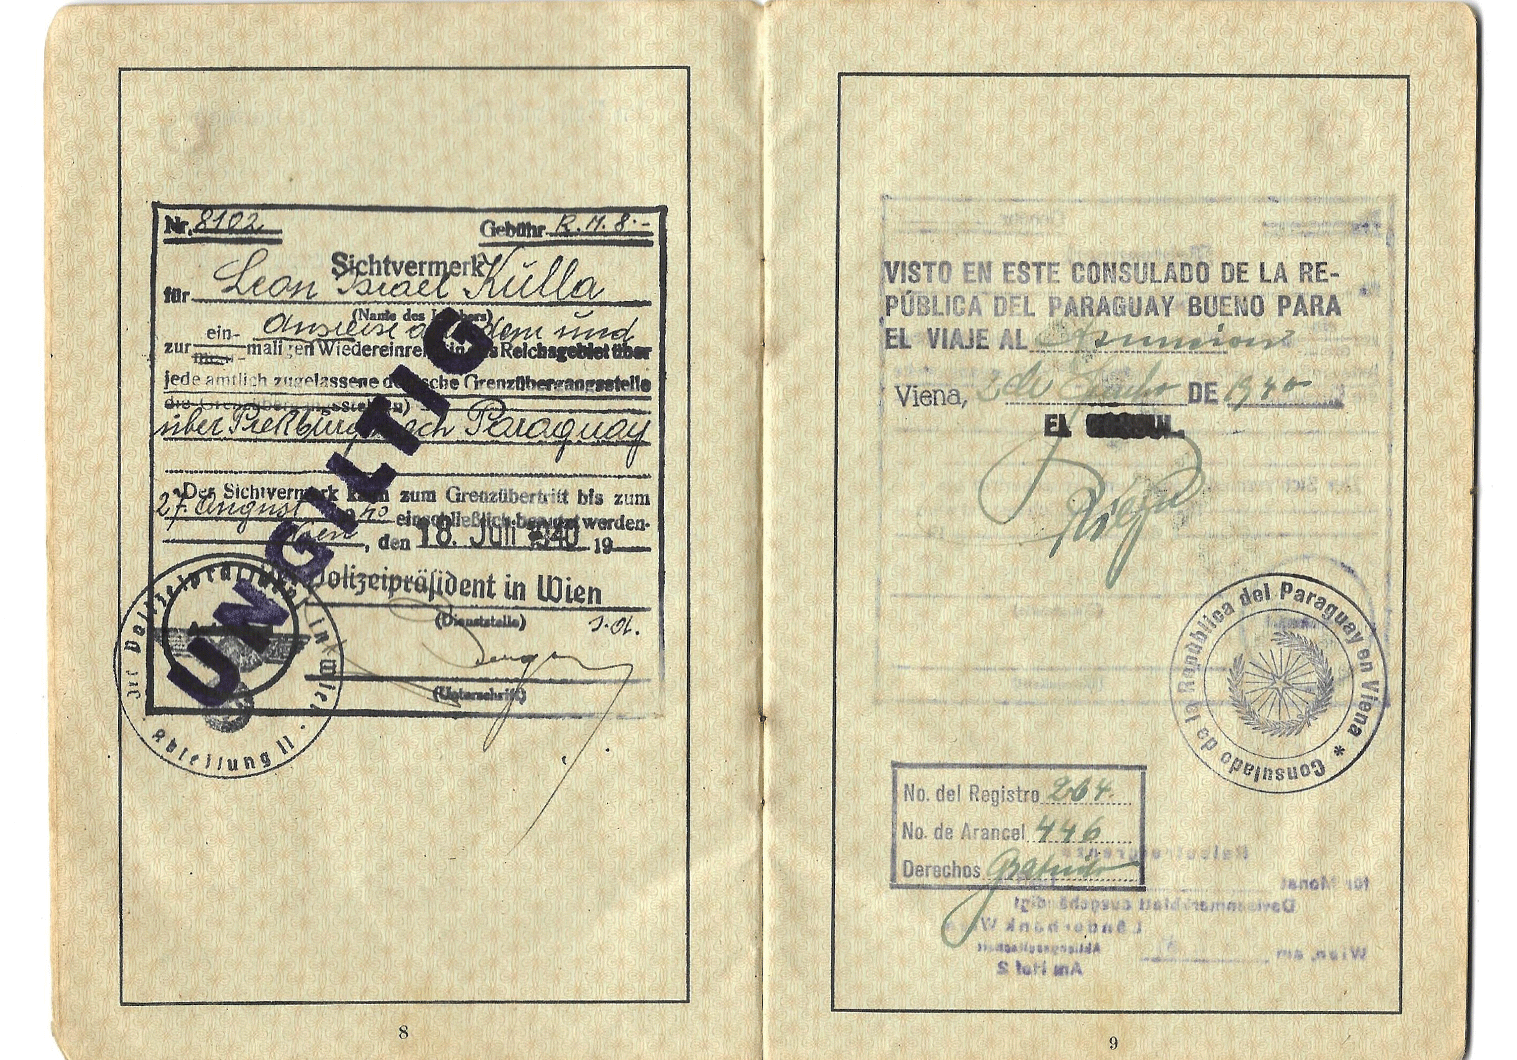 Dr. William Perl counterfeited Paraguayan visas.